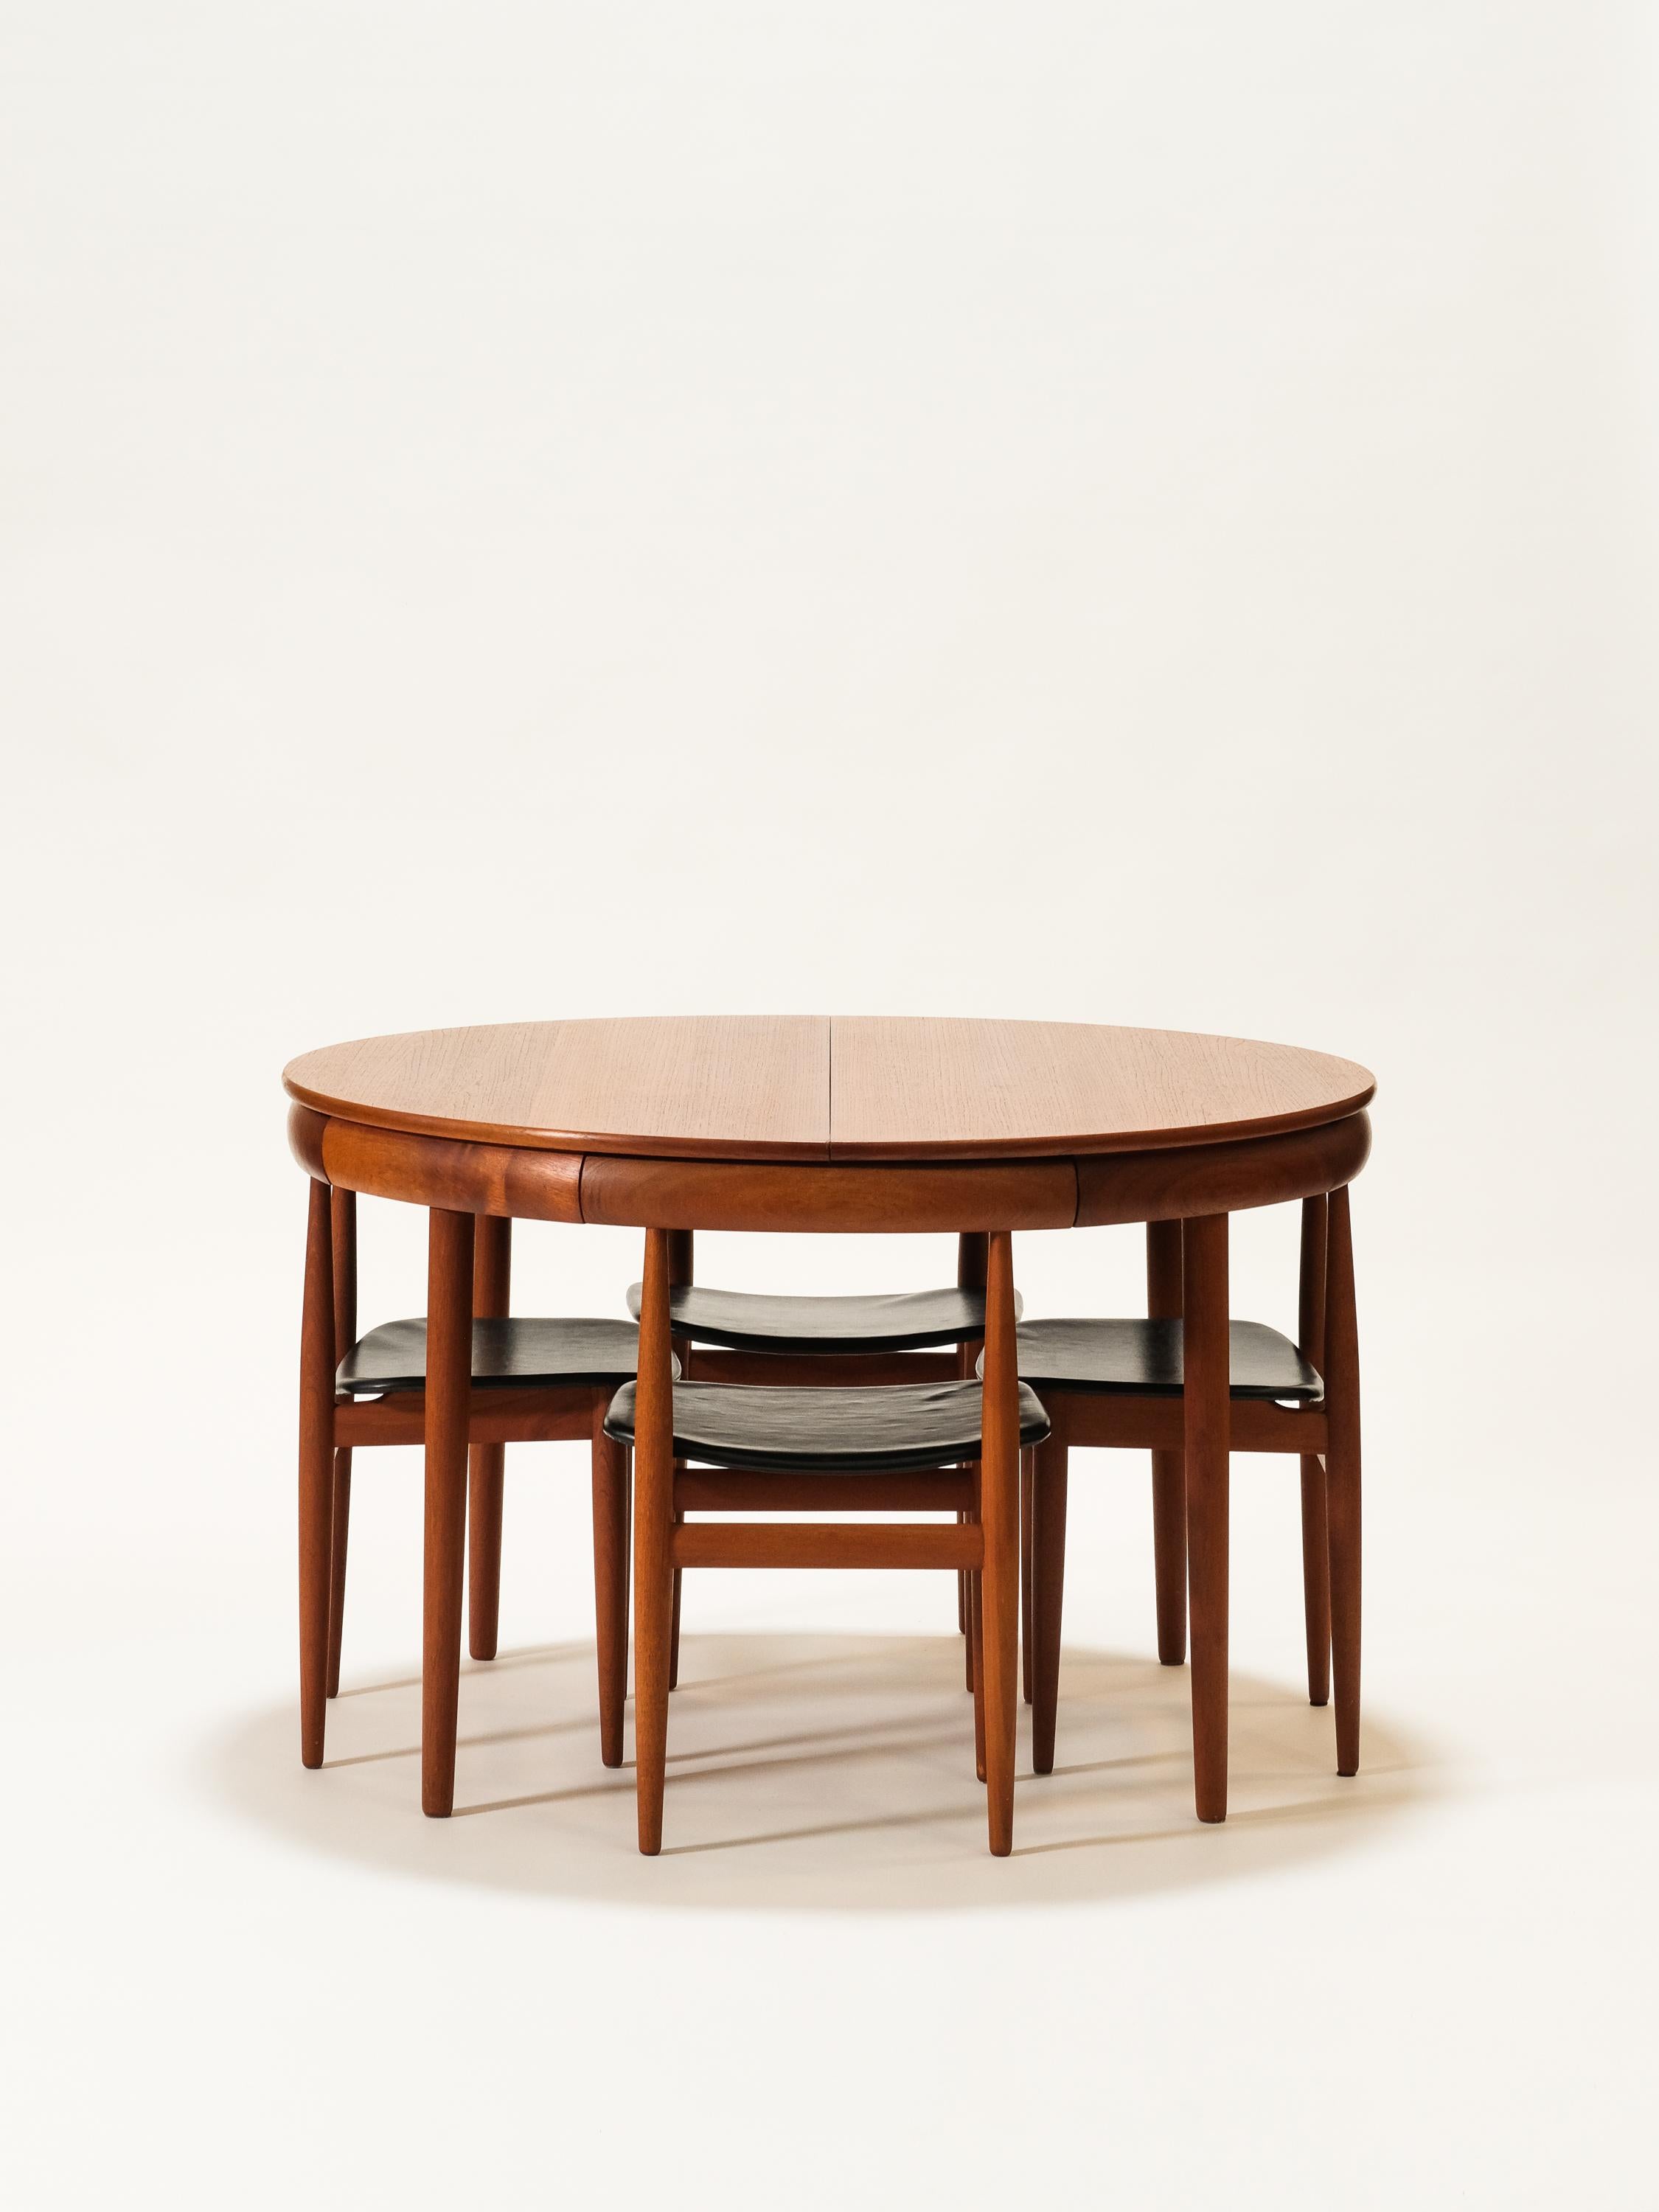 Unique “Roundette” dining set designed by Hans Olsen for Frem Rølje in Denmark circa 1960s. This striking dining set features a teak wood round table and four dining chairs. The dining chairs seamlessly tuck into the table with their curved back